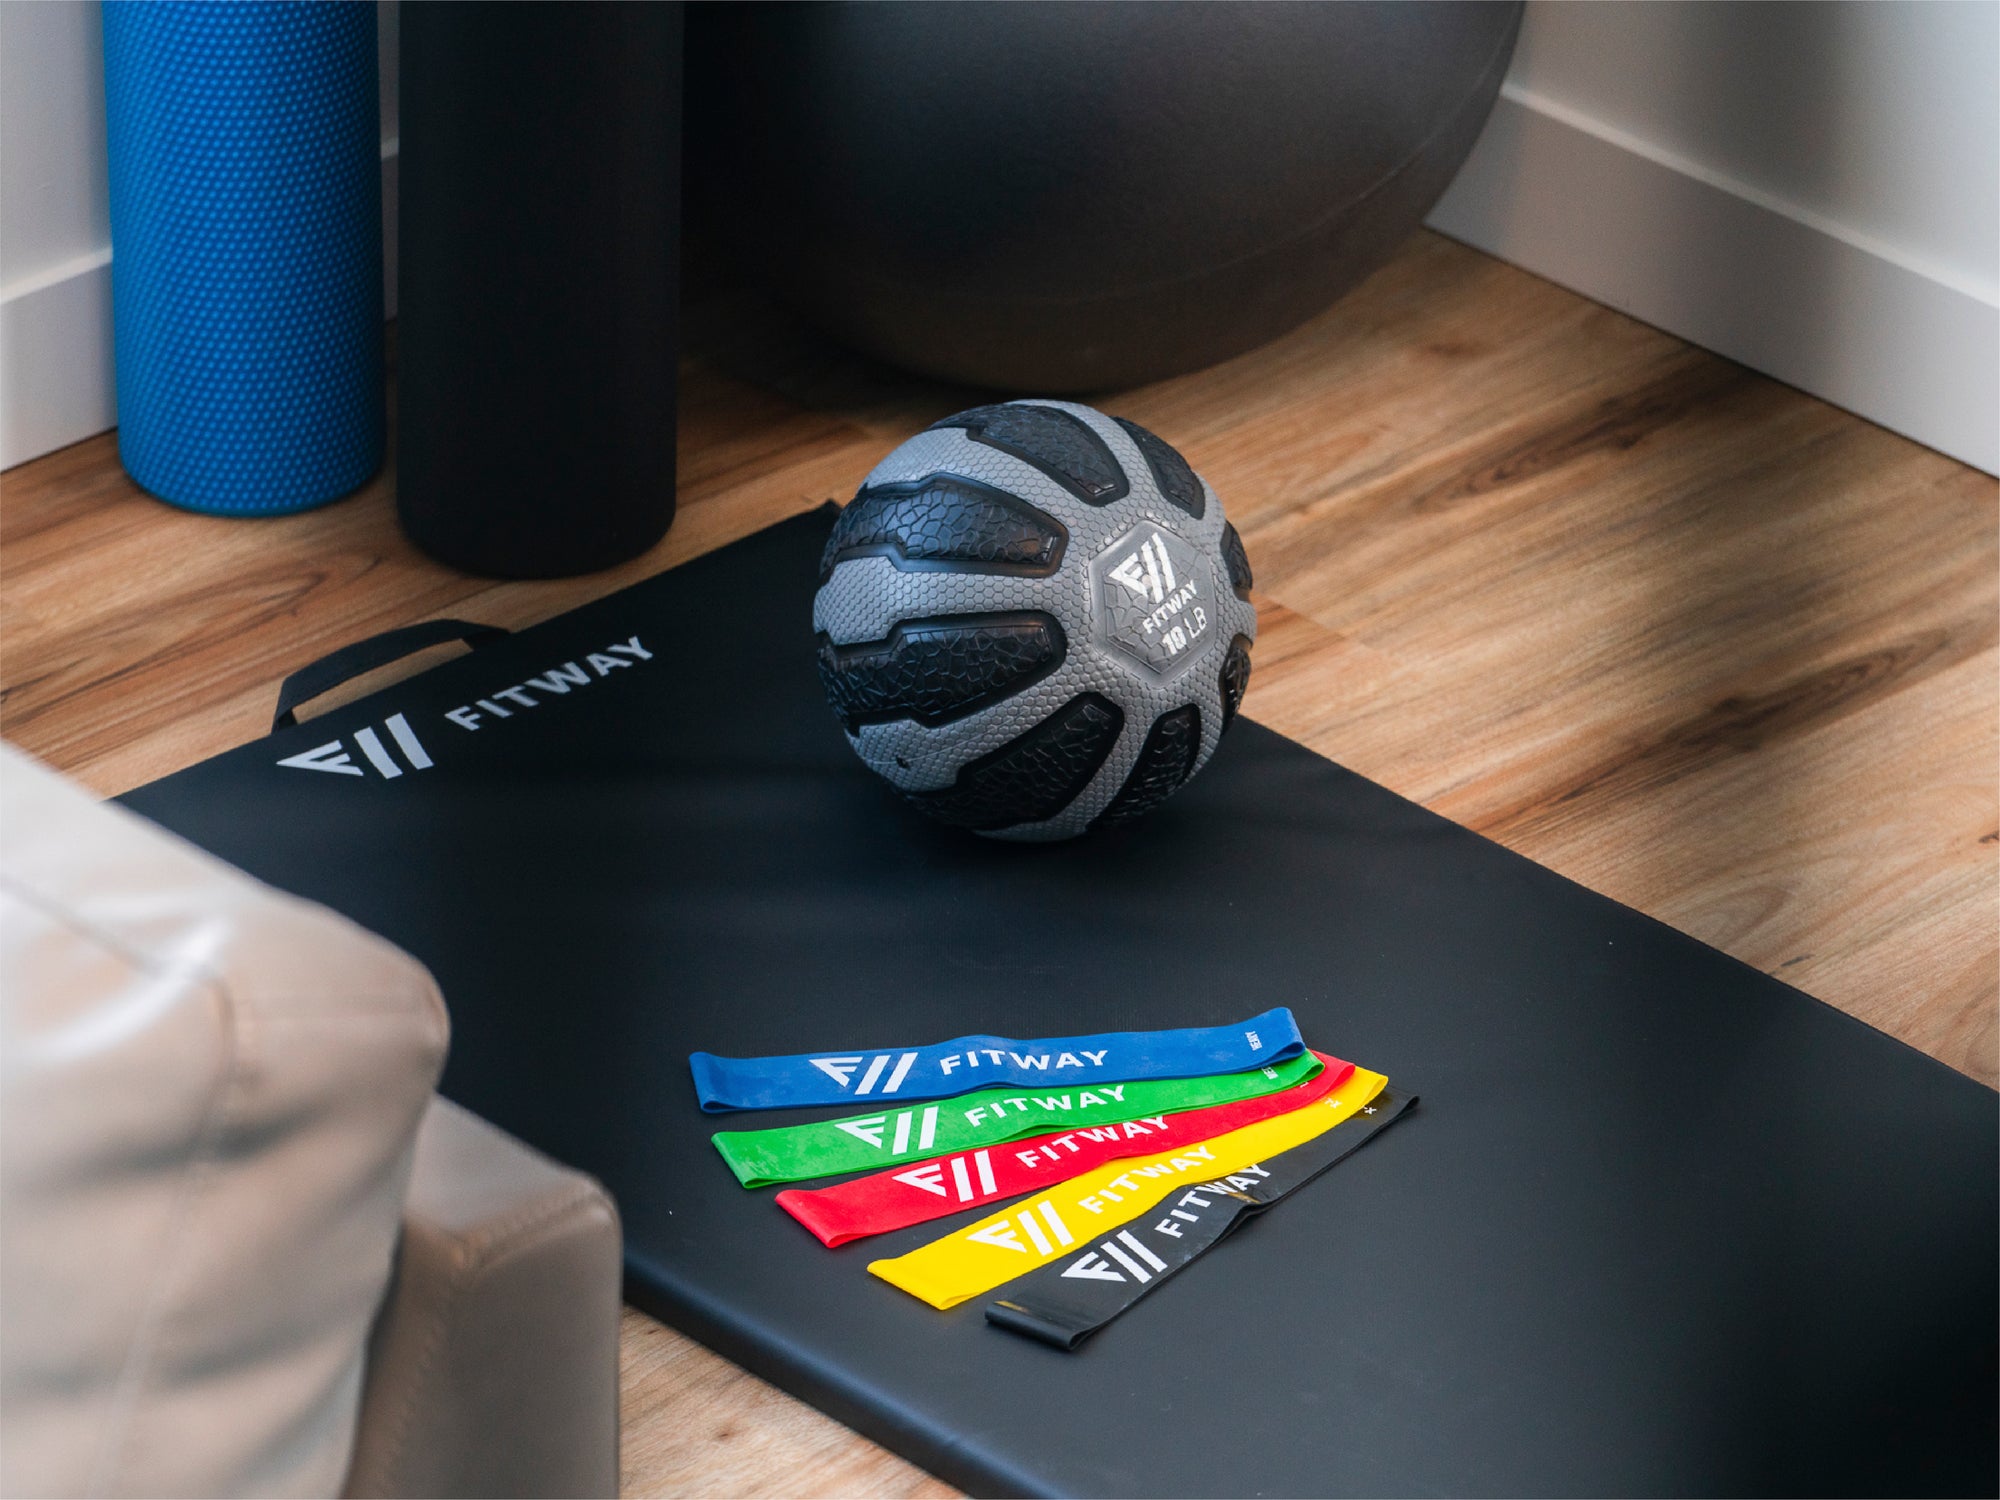 Fitness accessories in stock at Fitness Experience. Shop online or in store at one of our fitness equipment show rooms in Winnipeg, Regina, Calgary, Victoria and Nanaimo